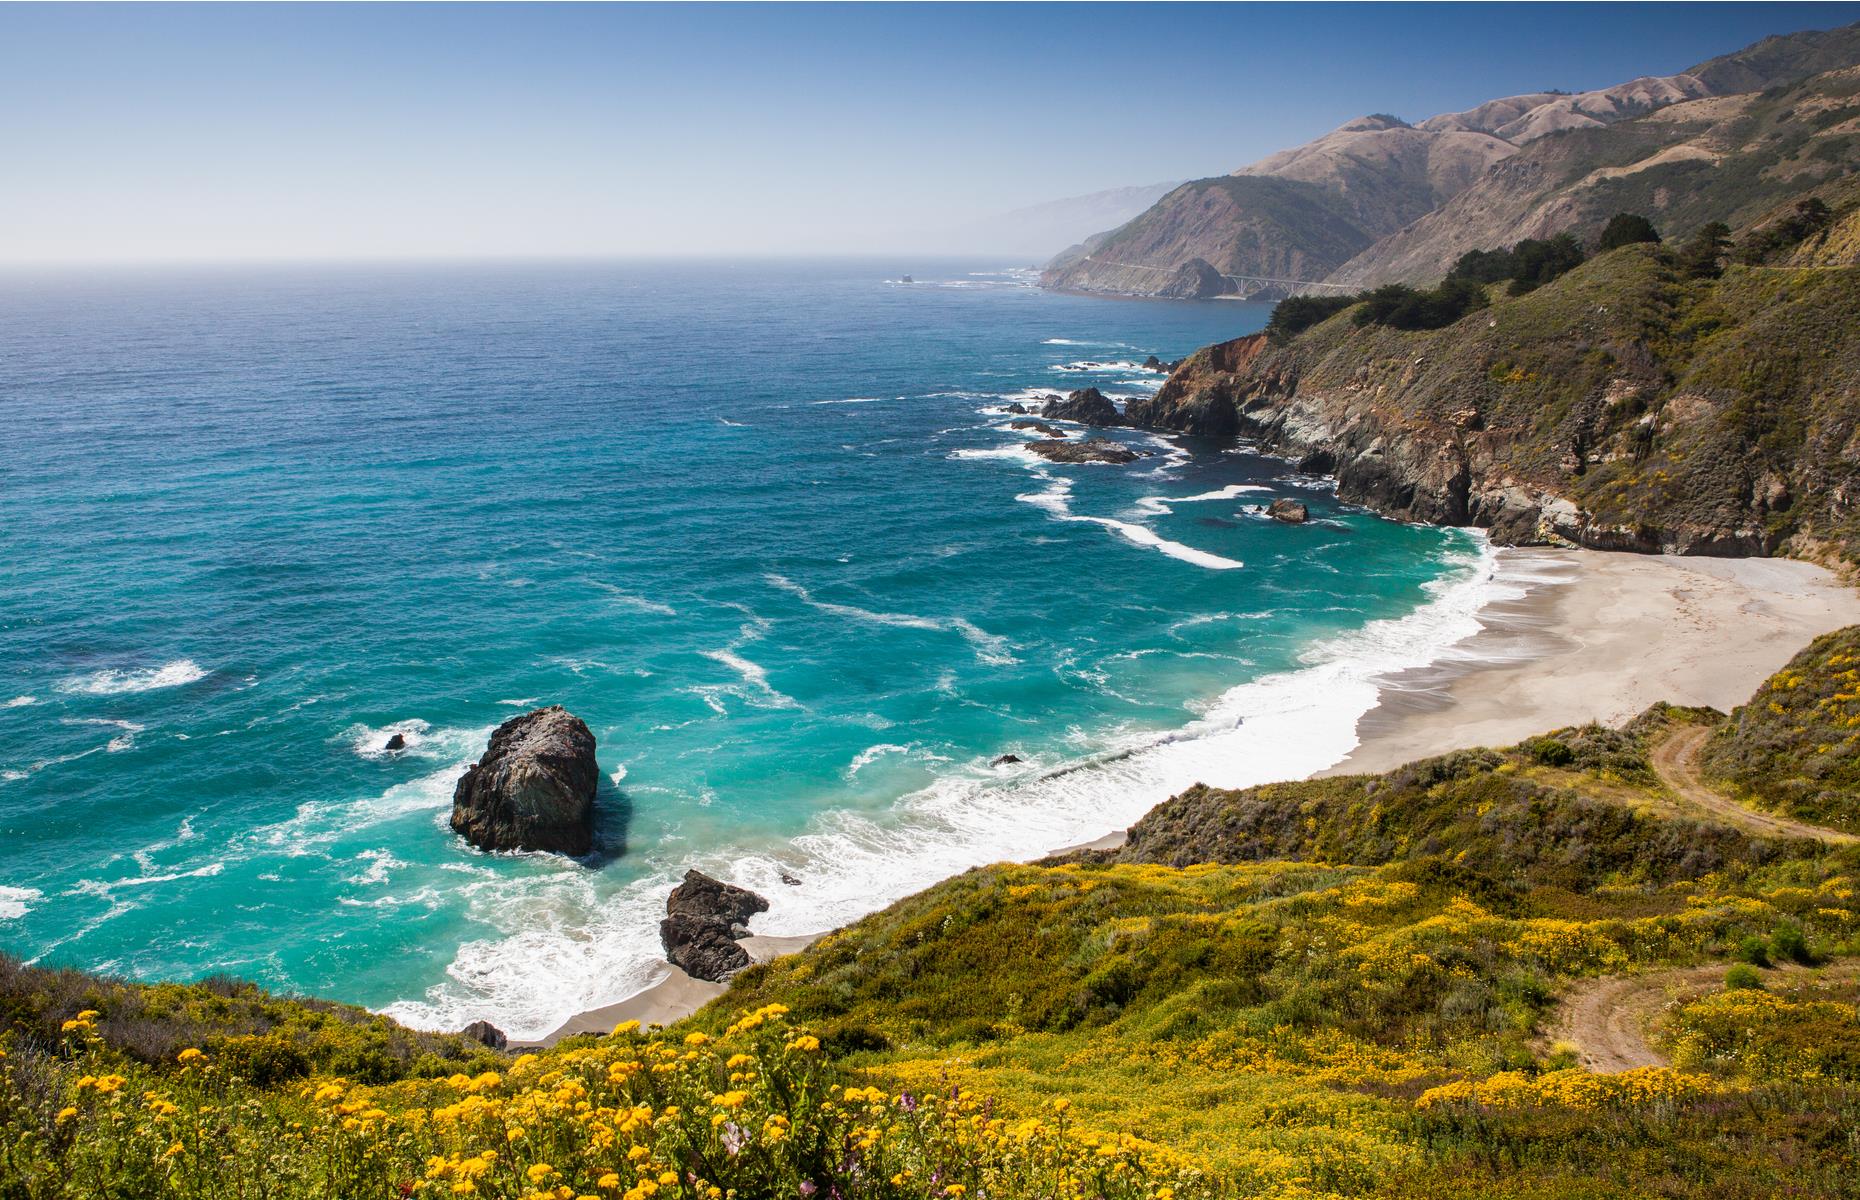 <p>Few stretches of road inspire so much awe and admiration as the stretch of the Pacific Coast Highway between Carmel and San Simeon, where cliffs protect caramel beaches and Monterey pines blanket the slopes. <a href="https://www.visitcalifornia.com/uk/destination/spotlight-big-sur">Big Sur</a> is even more beautiful viewed from horseback. Trail rides follow redwood-shaded paths in Andrew Molera State Park and end with a canter on the soft sand.</p>  <p><strong><a href="https://www.loveexploring.com/guides/88203/californias-central-coast-road-trip-the-top-things-to-do-where-to-stay-">Find our guide to the perfect Central Coast road trip in California</a></strong></p>